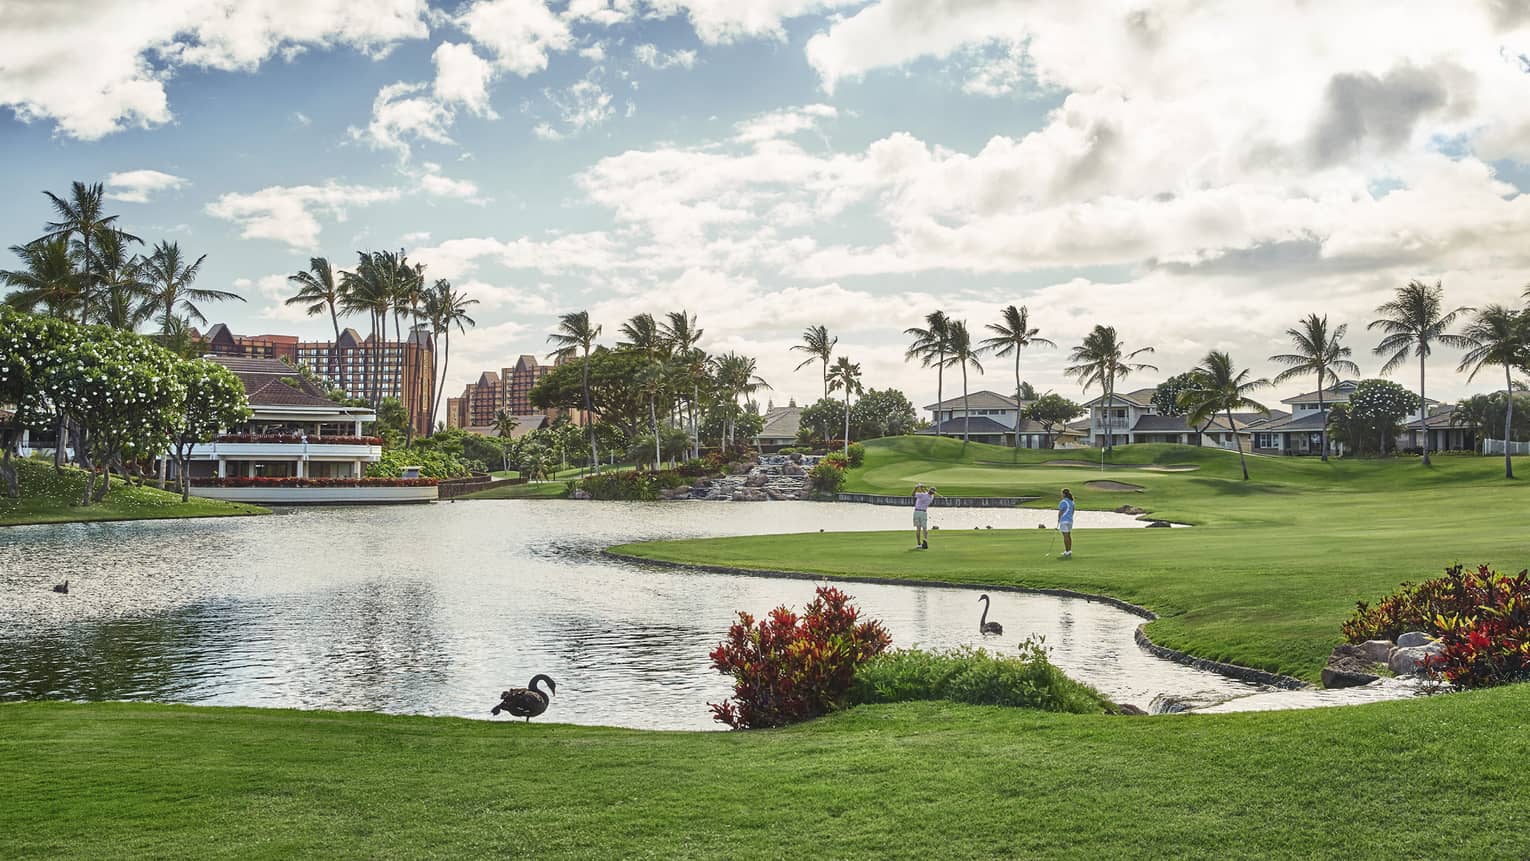 Golf course featuring a irregular shaped pond, tropical bushes, palm trees in the distance